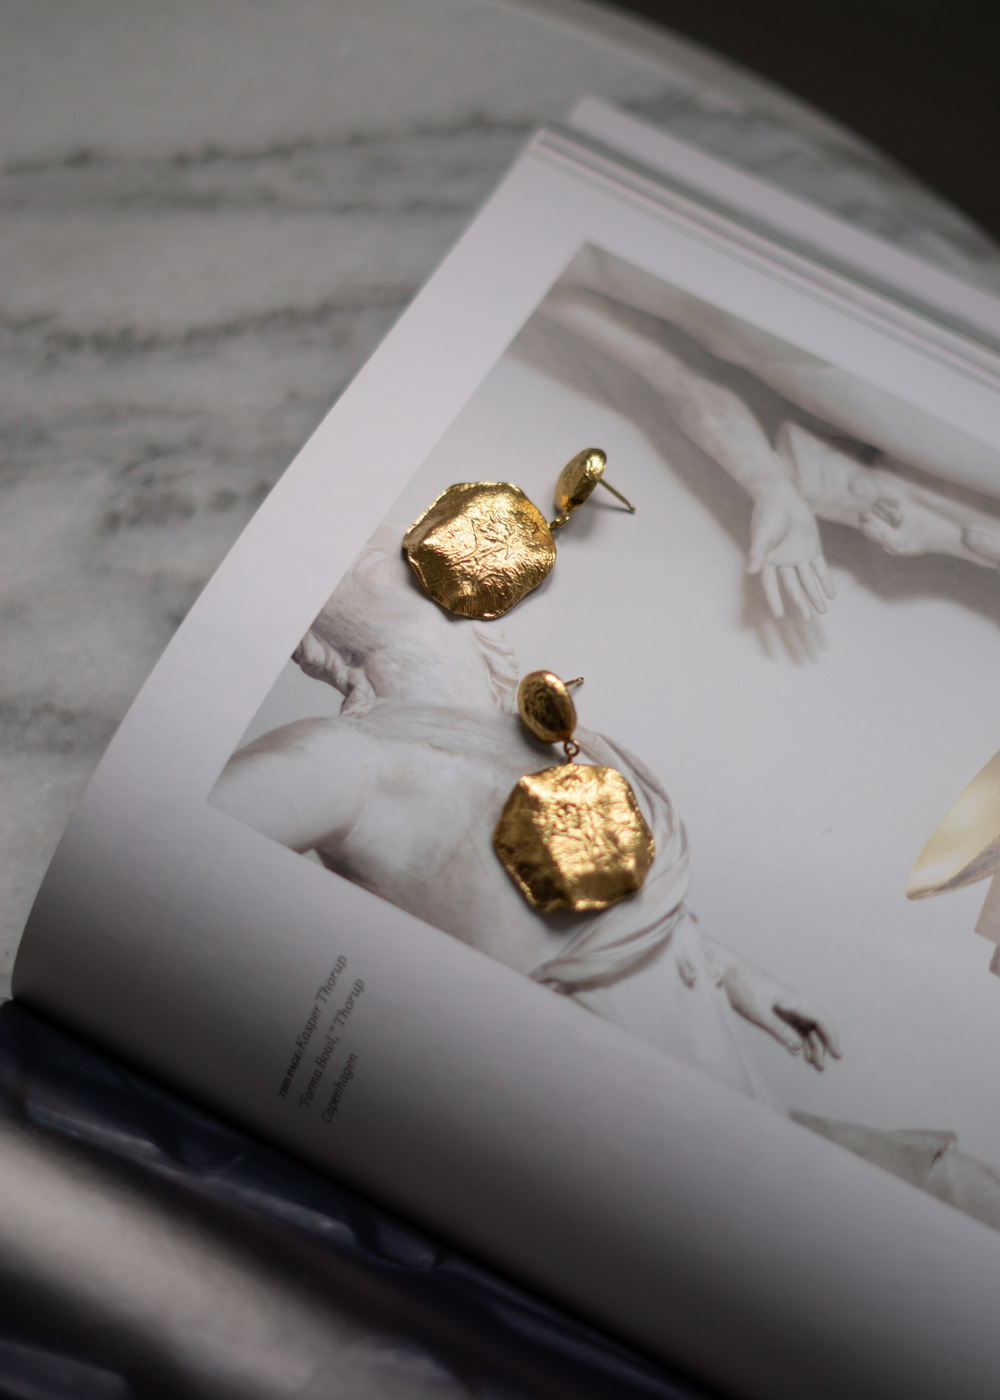 Handcrafted Gold Jewelry, Earrings Maria Sørensen, Danish Design | Fashion Style Timeless Aesthetic, Statement Golden Jewelry | RG Daily Blog